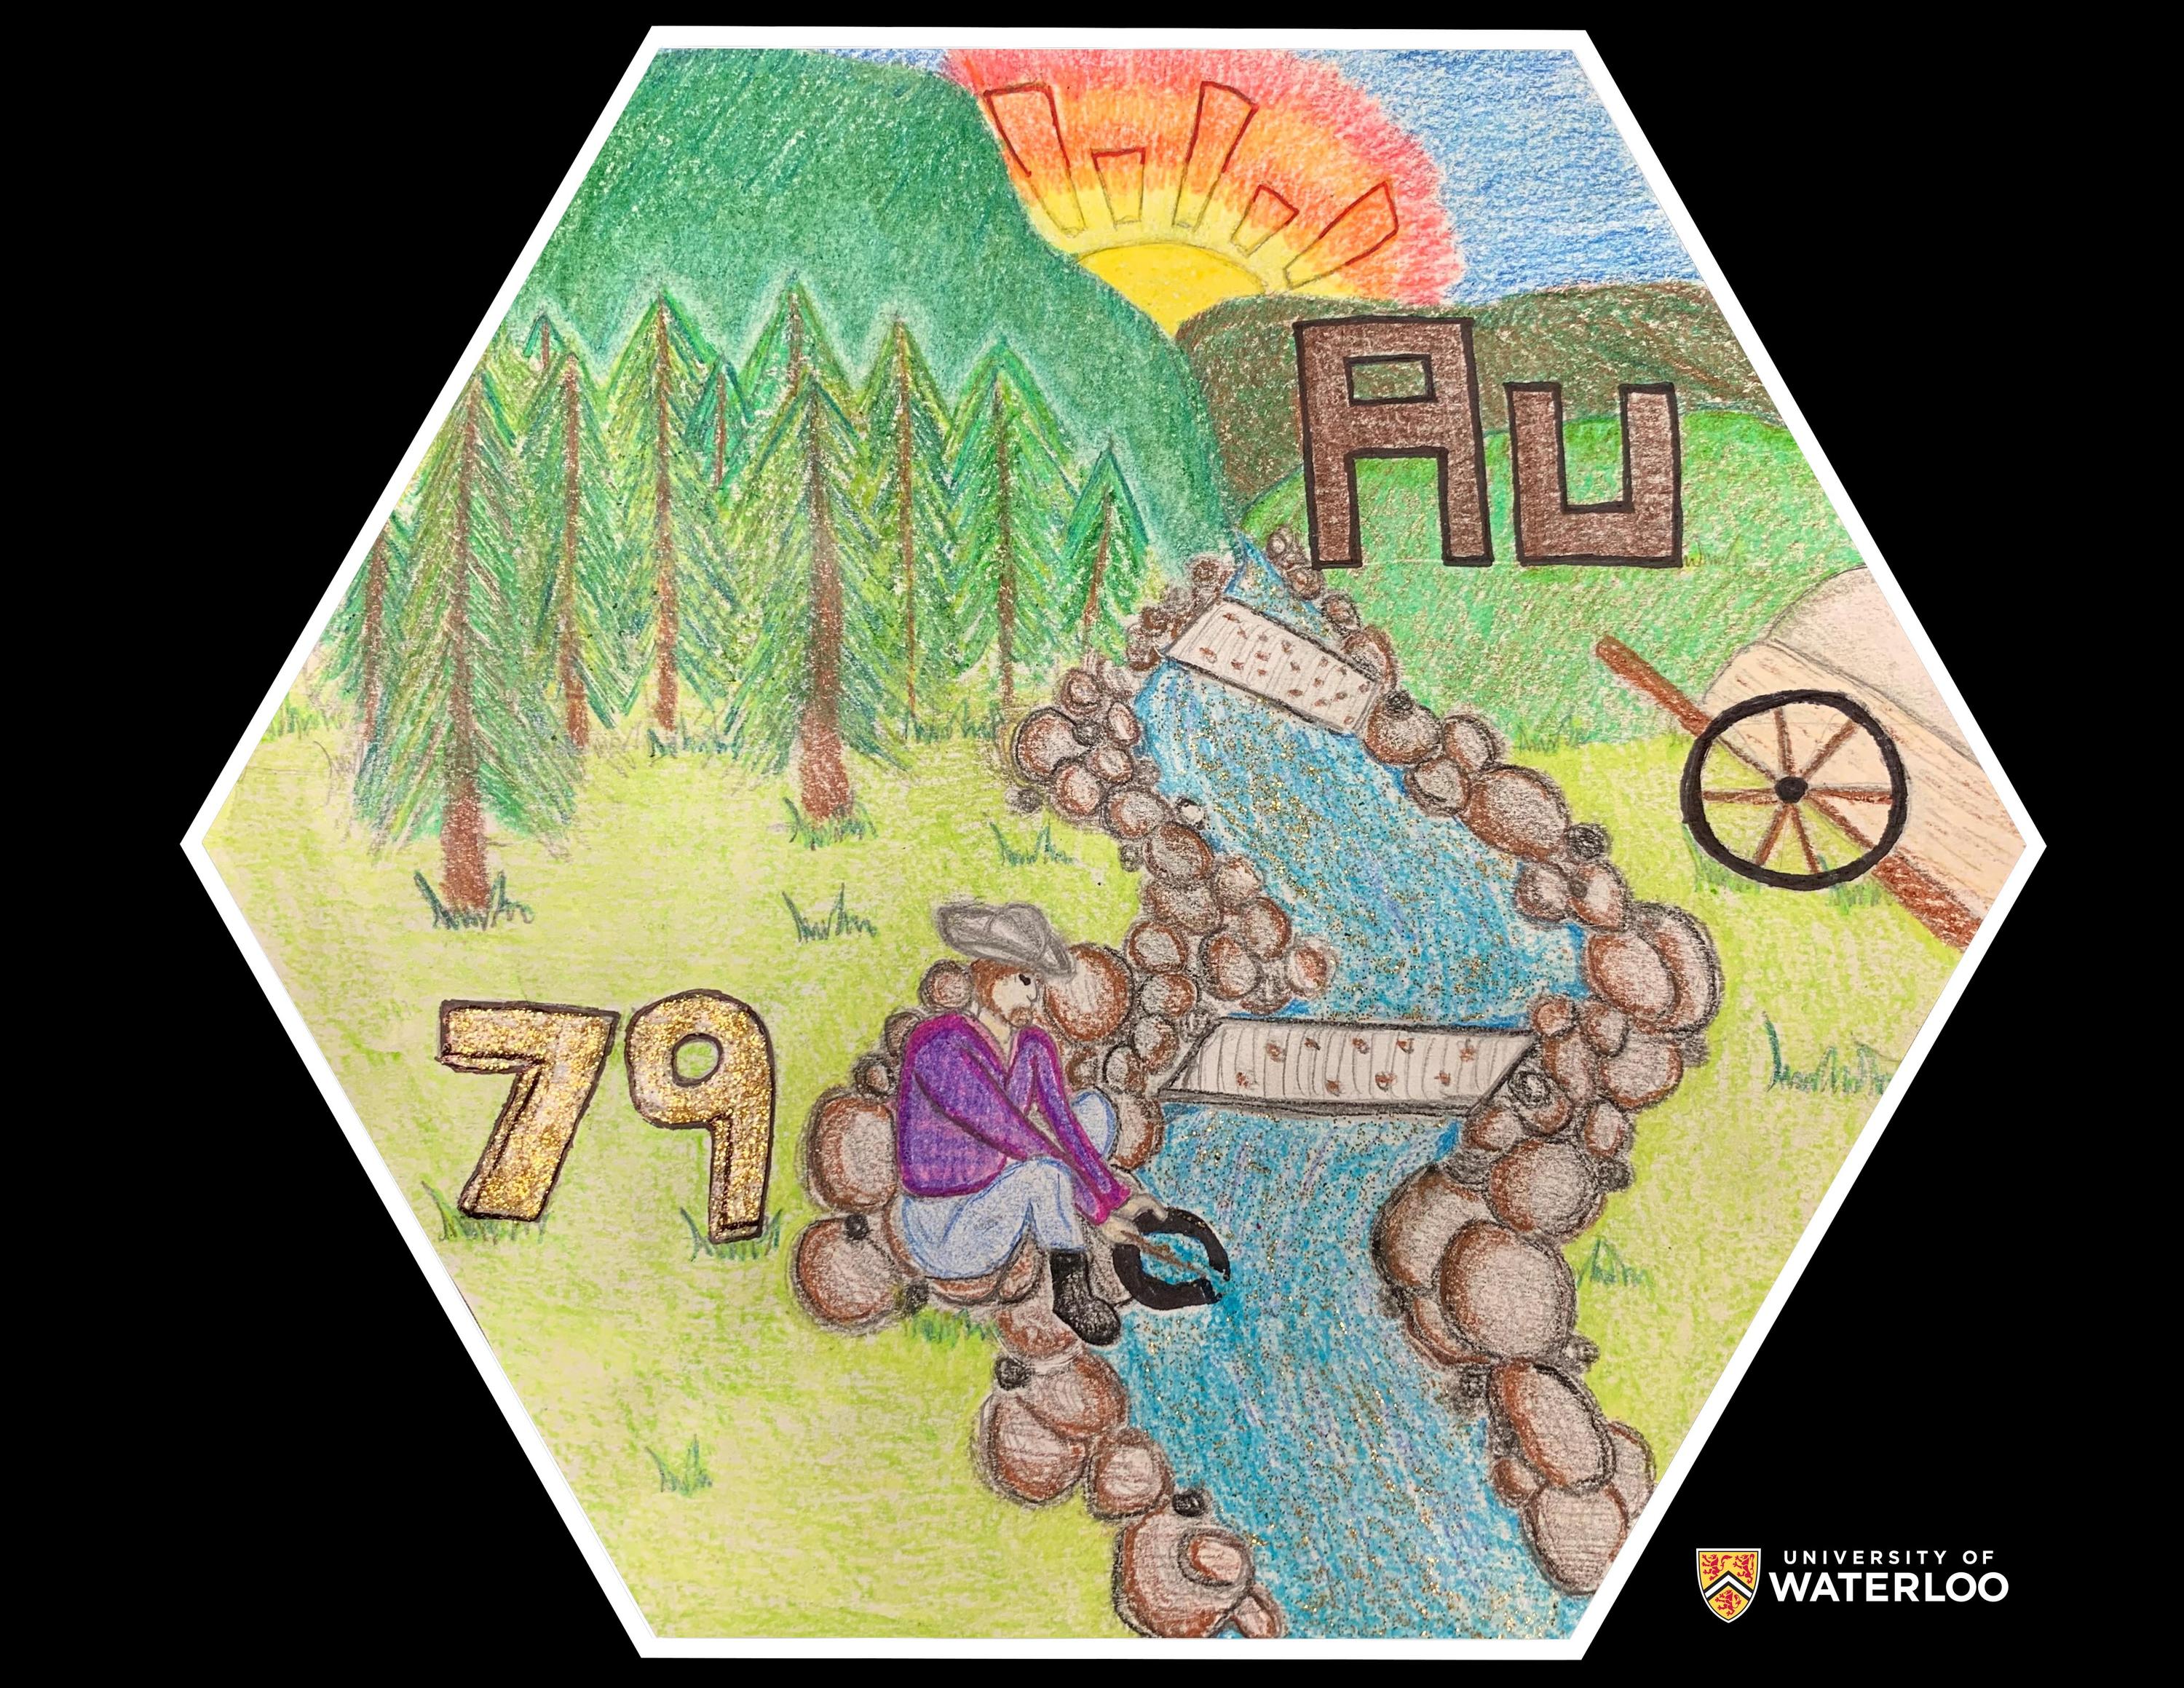 Multimedia. A mountain landscape with a miner panning for gold in a river in the 1800s. The chemical symbol “Au”, drawn in earth tones, appears upper right with the glittery, gold-coloured atomic number “79” in the lower left of the tile.